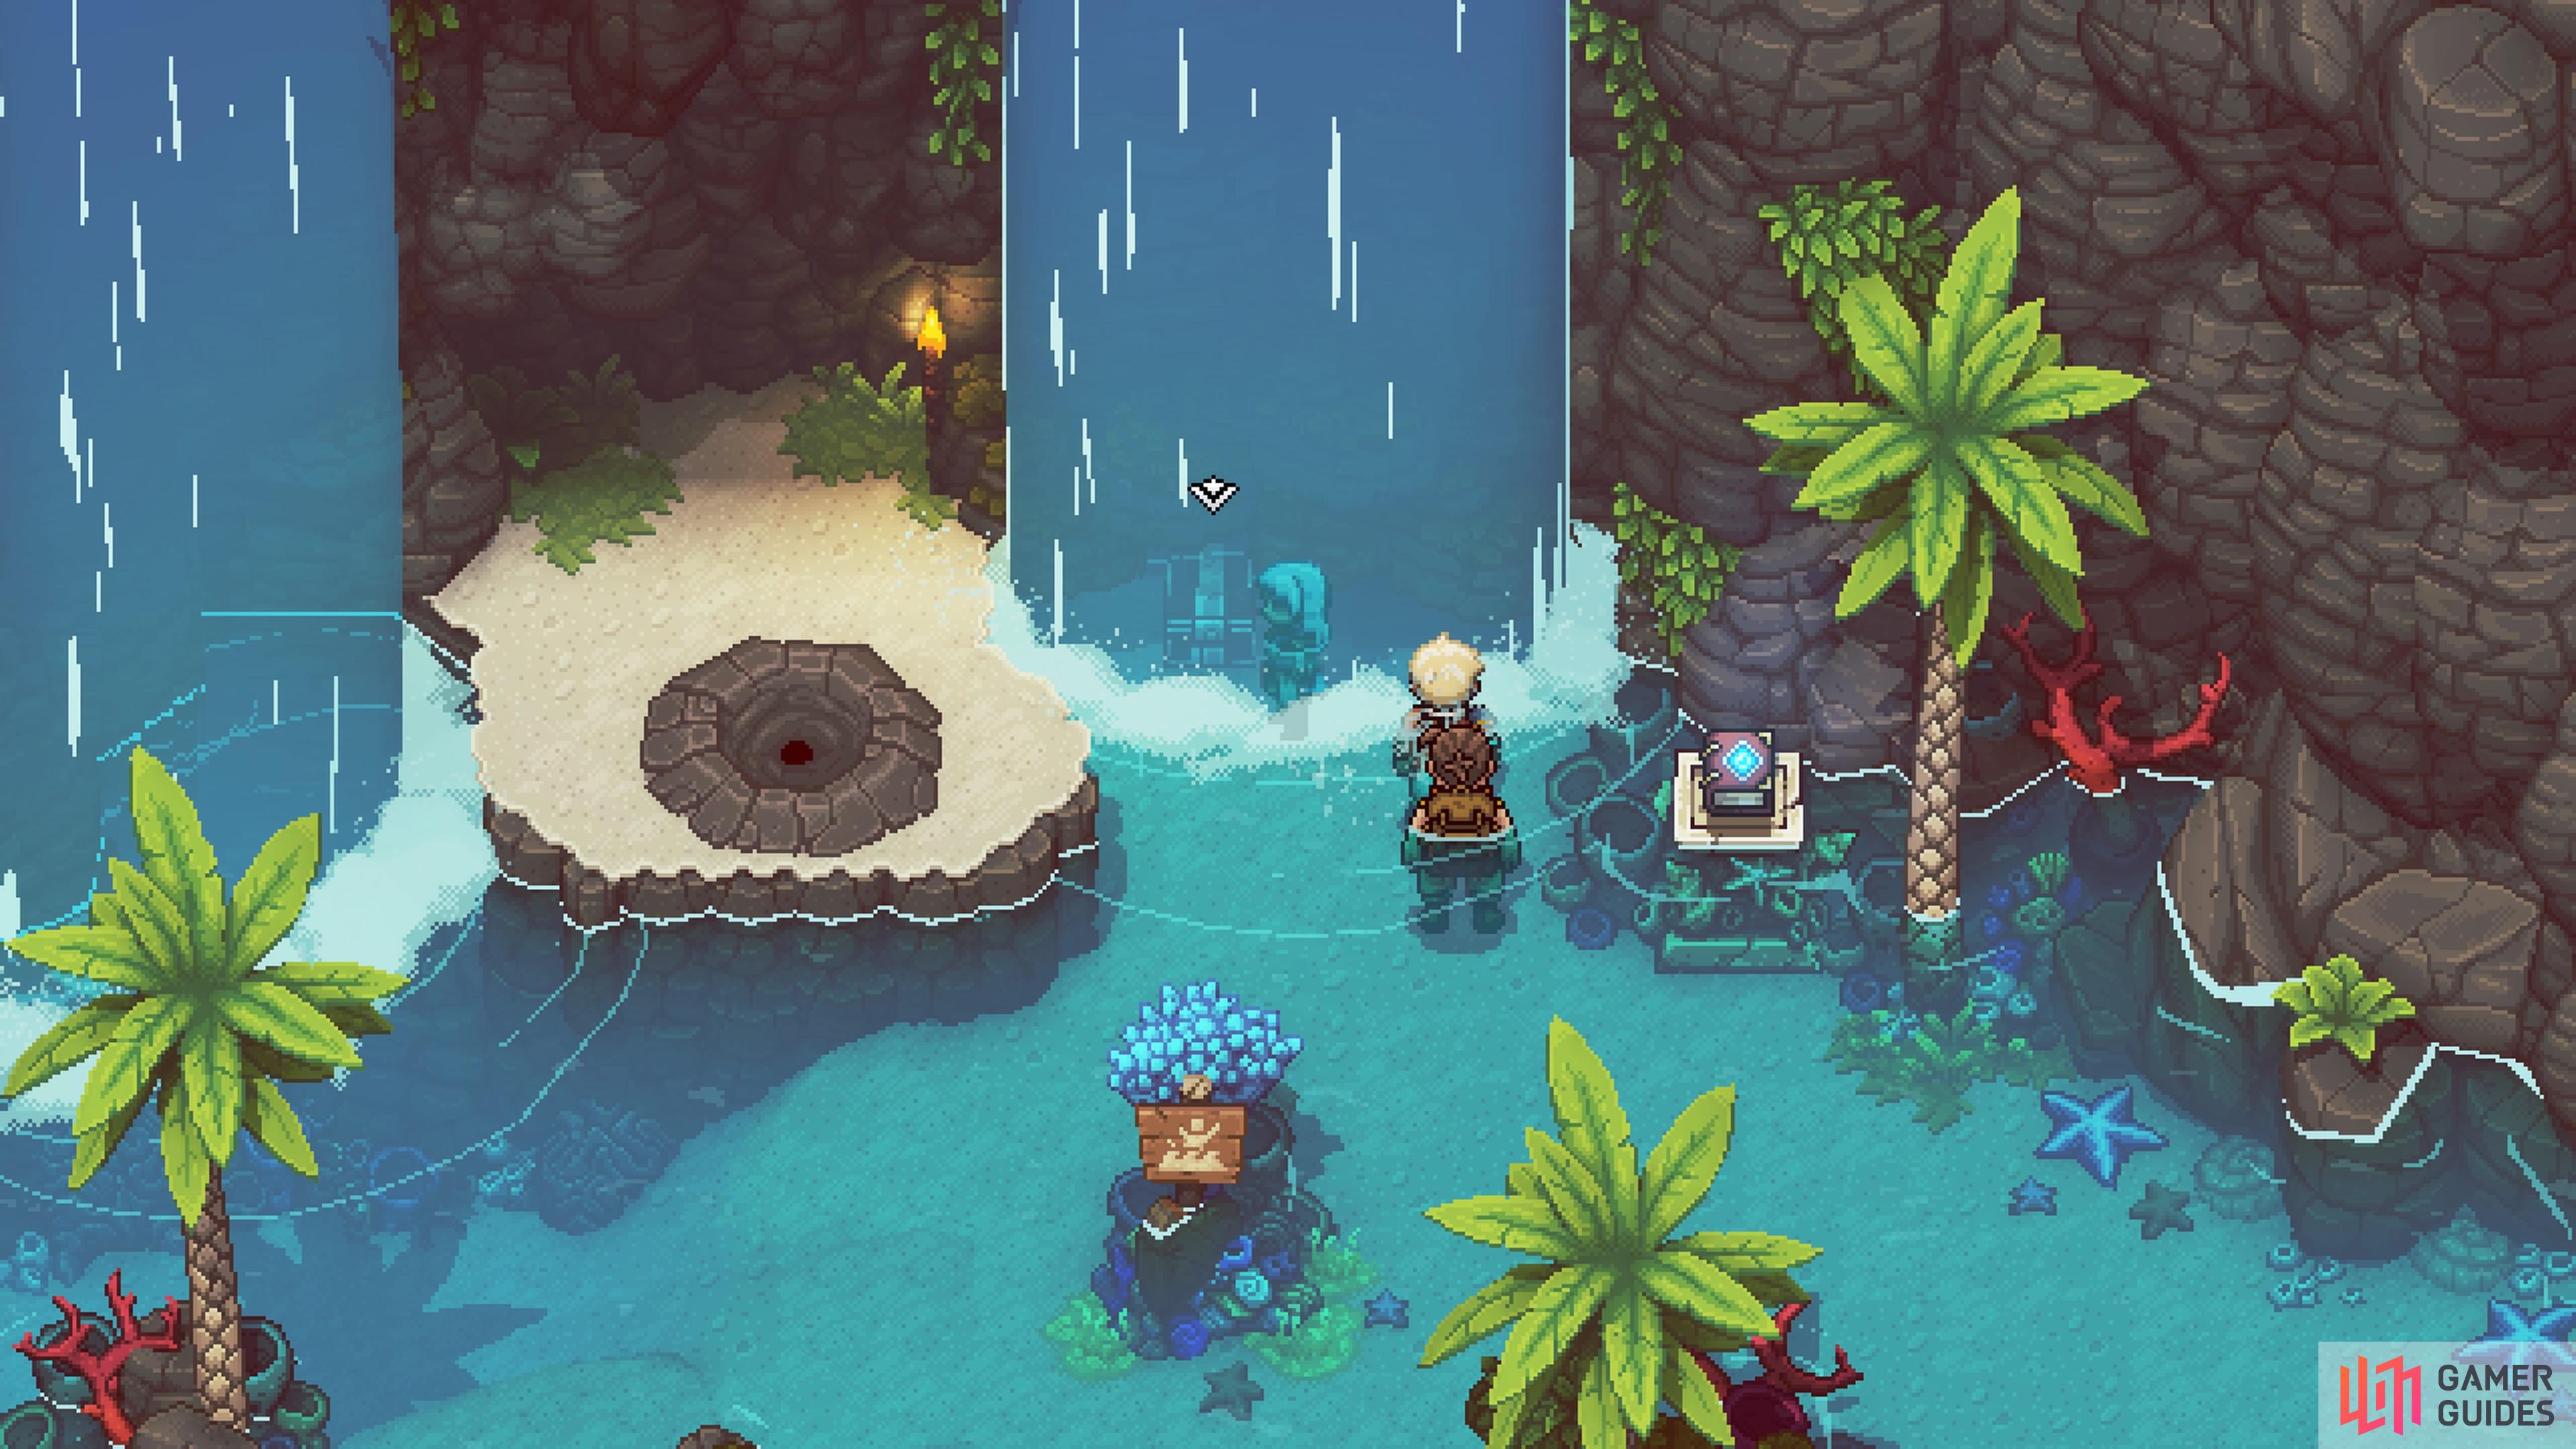 There is a chest hidden behind this waterfall, right at the beginning.